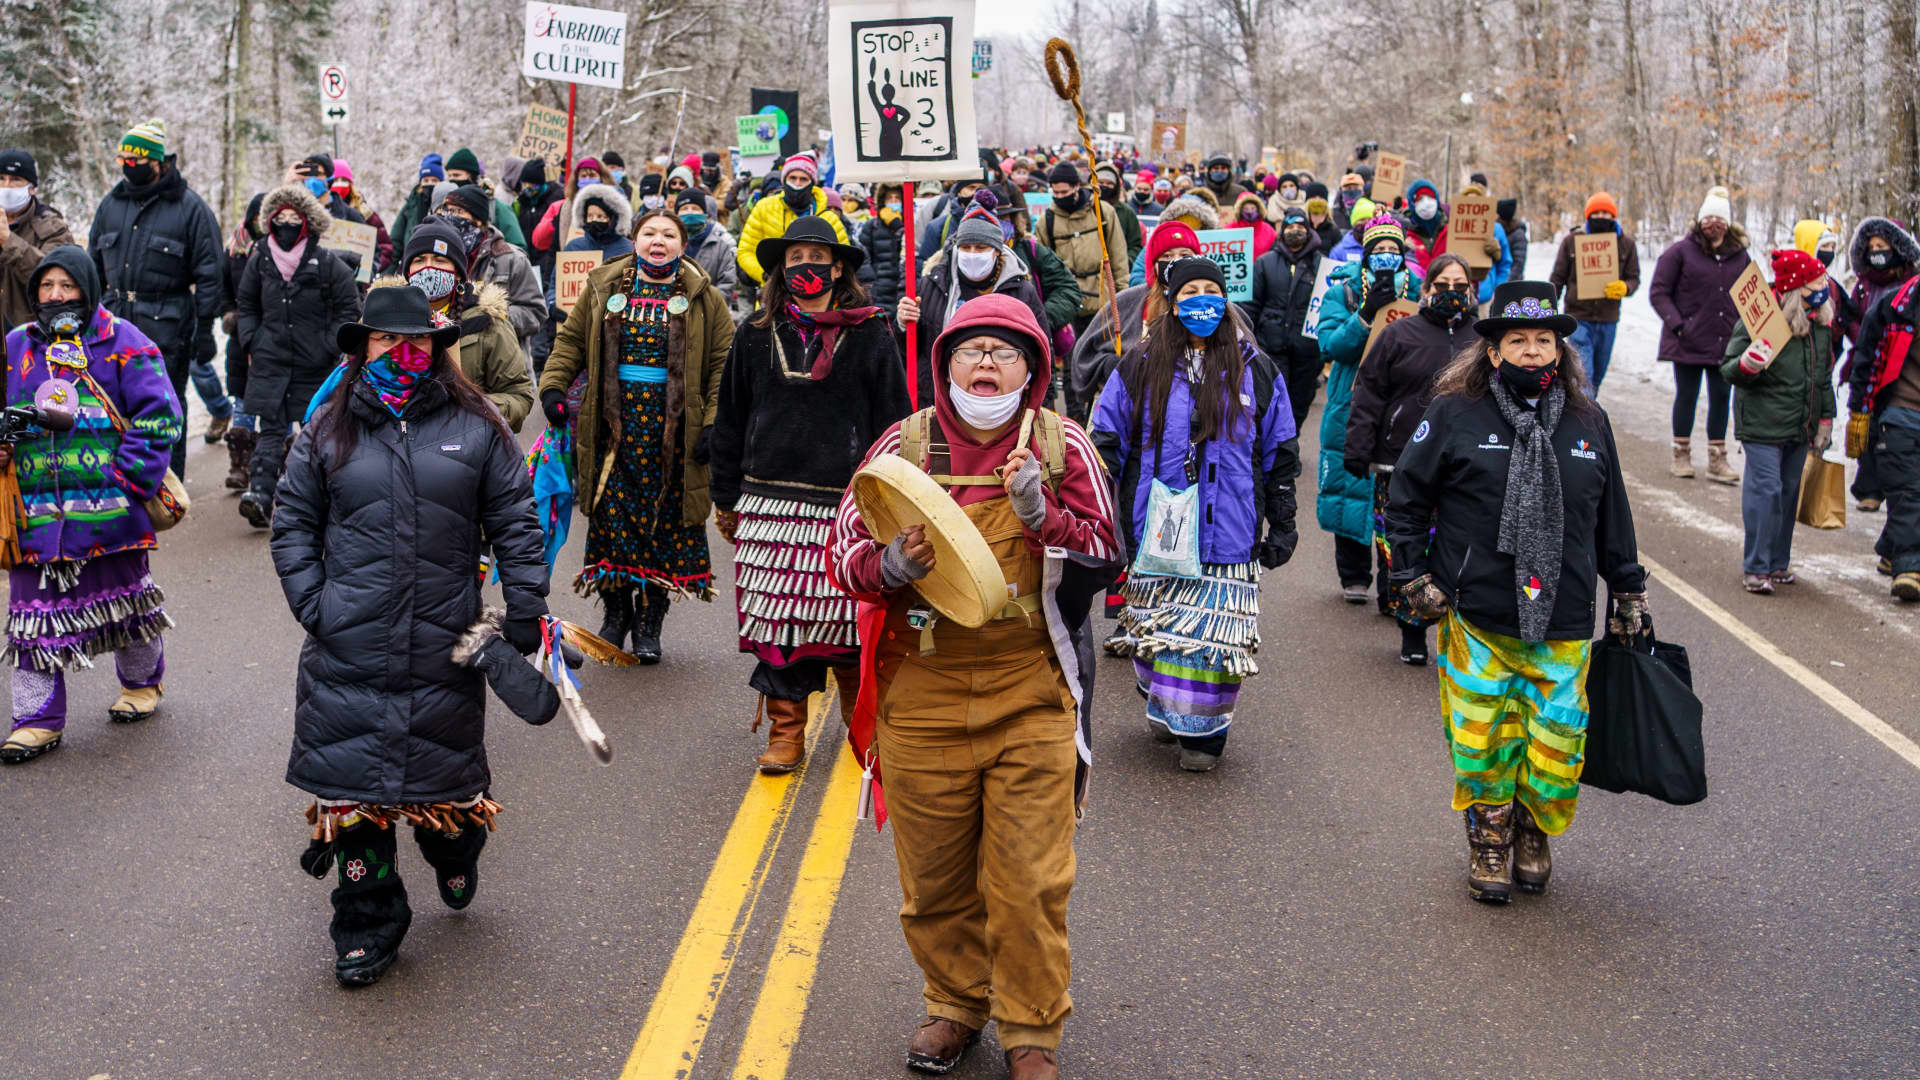 Environmental activists and Native Americans march to the construction site for the Line 3 oil pipeline near Palisade, Minnesota on January 9, 2021. Line 3 is an oil sands pipeline which runs from Hardisty, Alberta, Canada to Superior, Wisconsin in the United States.